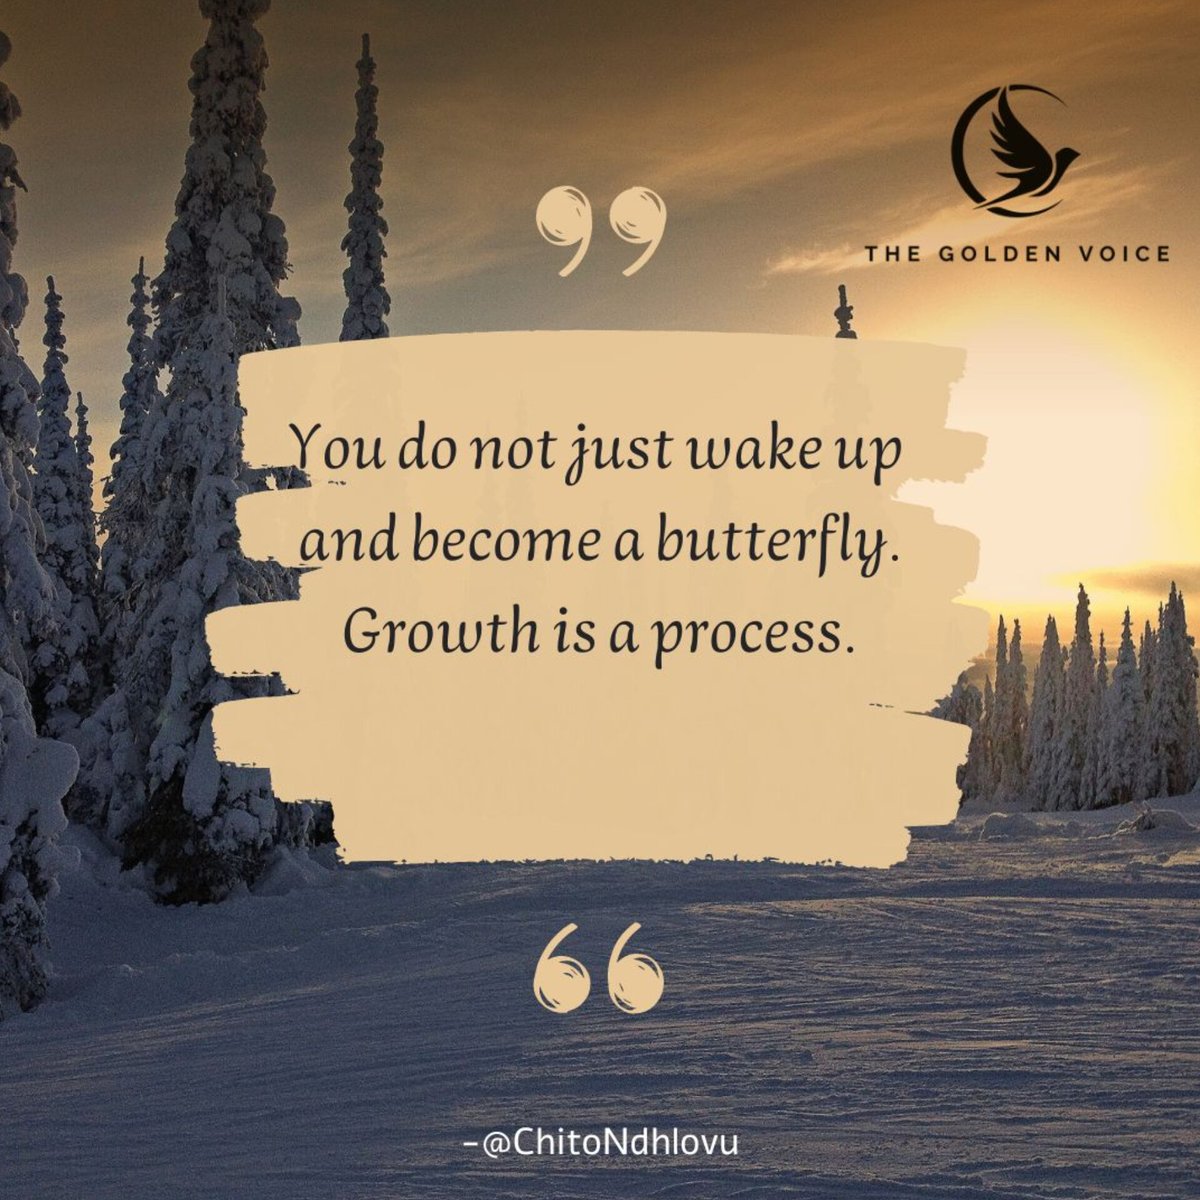 Whether you’re starting your own business or learning a new skill, one thing’s for sure: It takes time. Give yourself grace to become that butterfly!

#ChitoNdhlovu #TheGoldenVoice